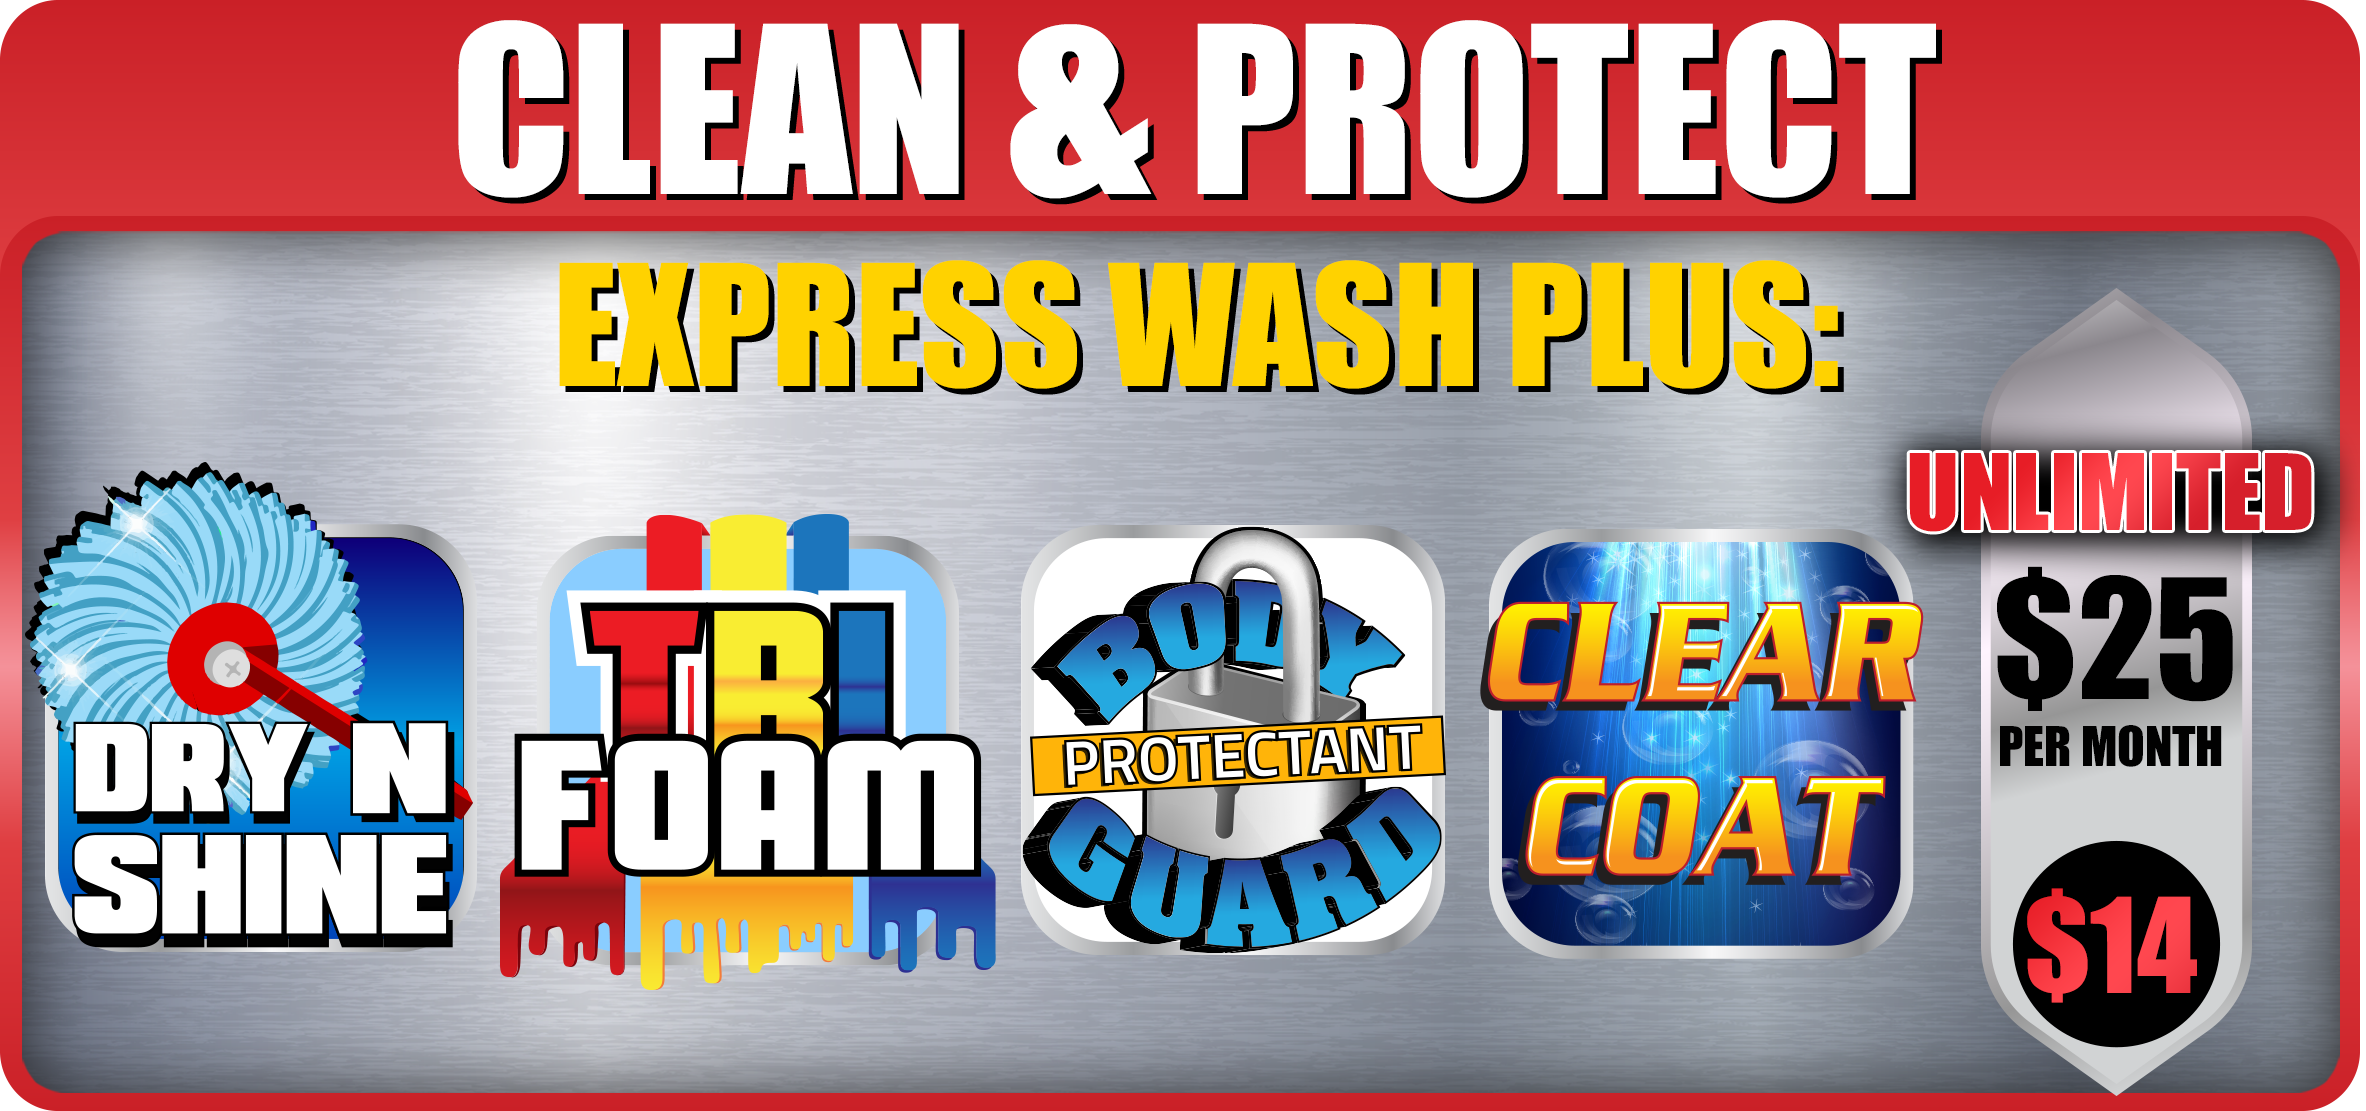 Clean & Protect